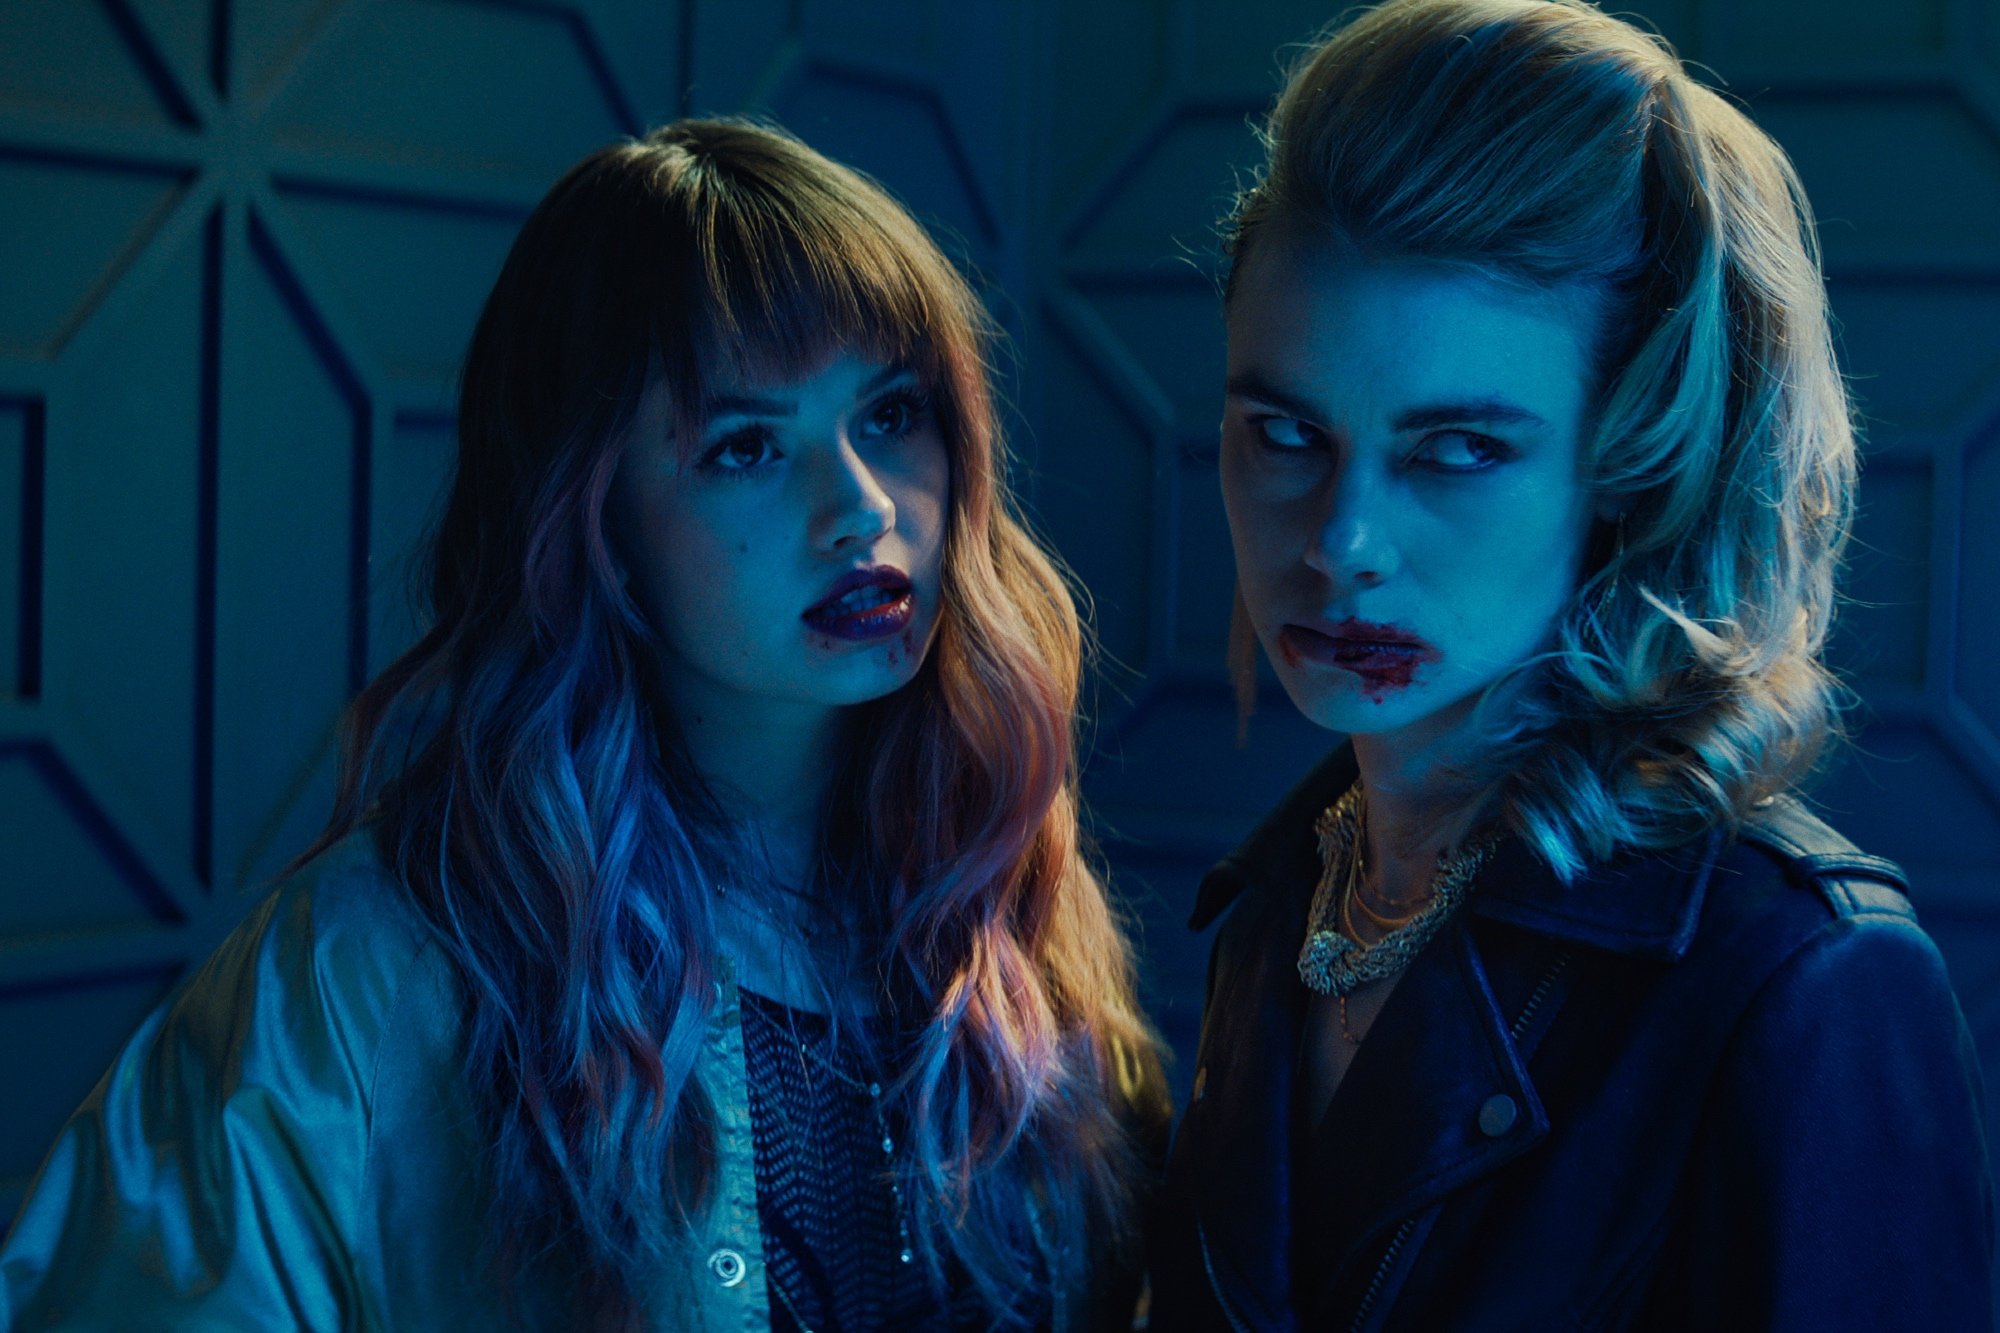 'Night Teeth' stars Debby Ryan as Blaire and Lucy Fry as Zoe with blood on their mouths